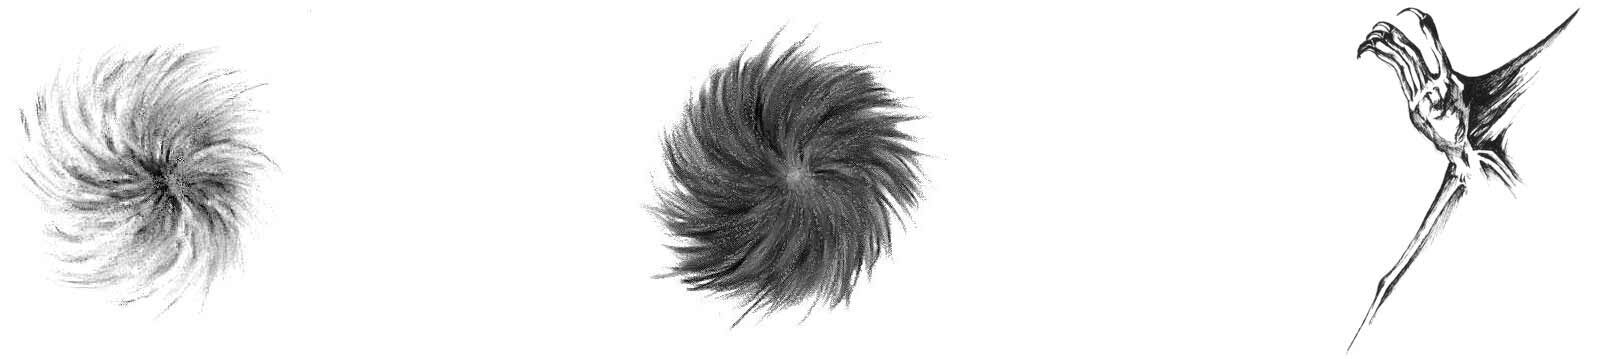 An image depicting the swirling hair pattern found on the hind foot of the Virginia Big-Eared Bat